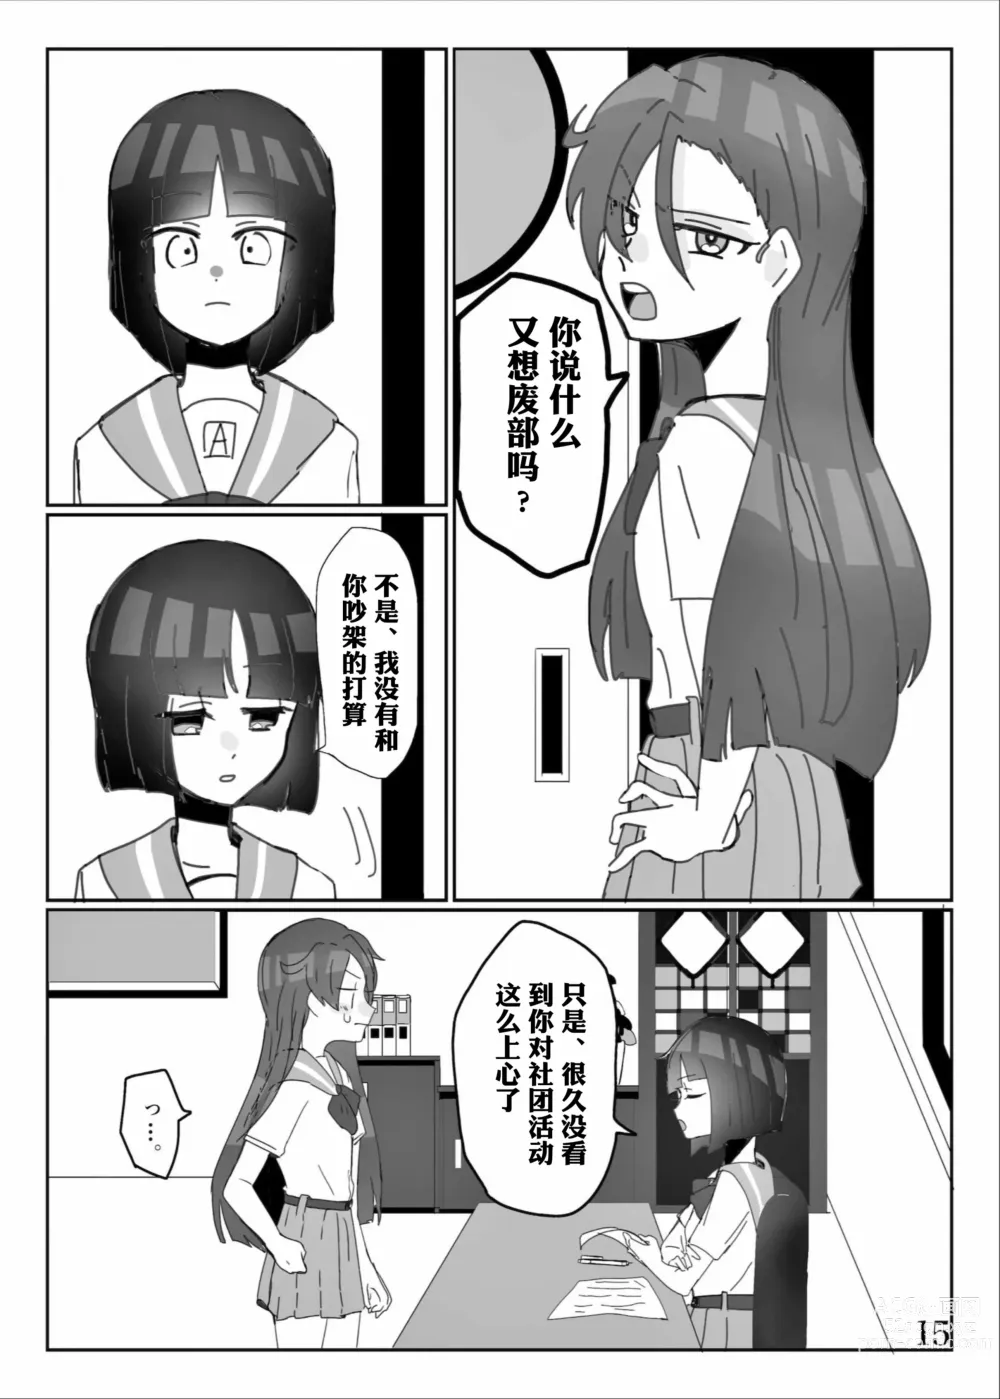 Page 17 of doujinshi 想做能干的孩子♪ DO MY BEST!